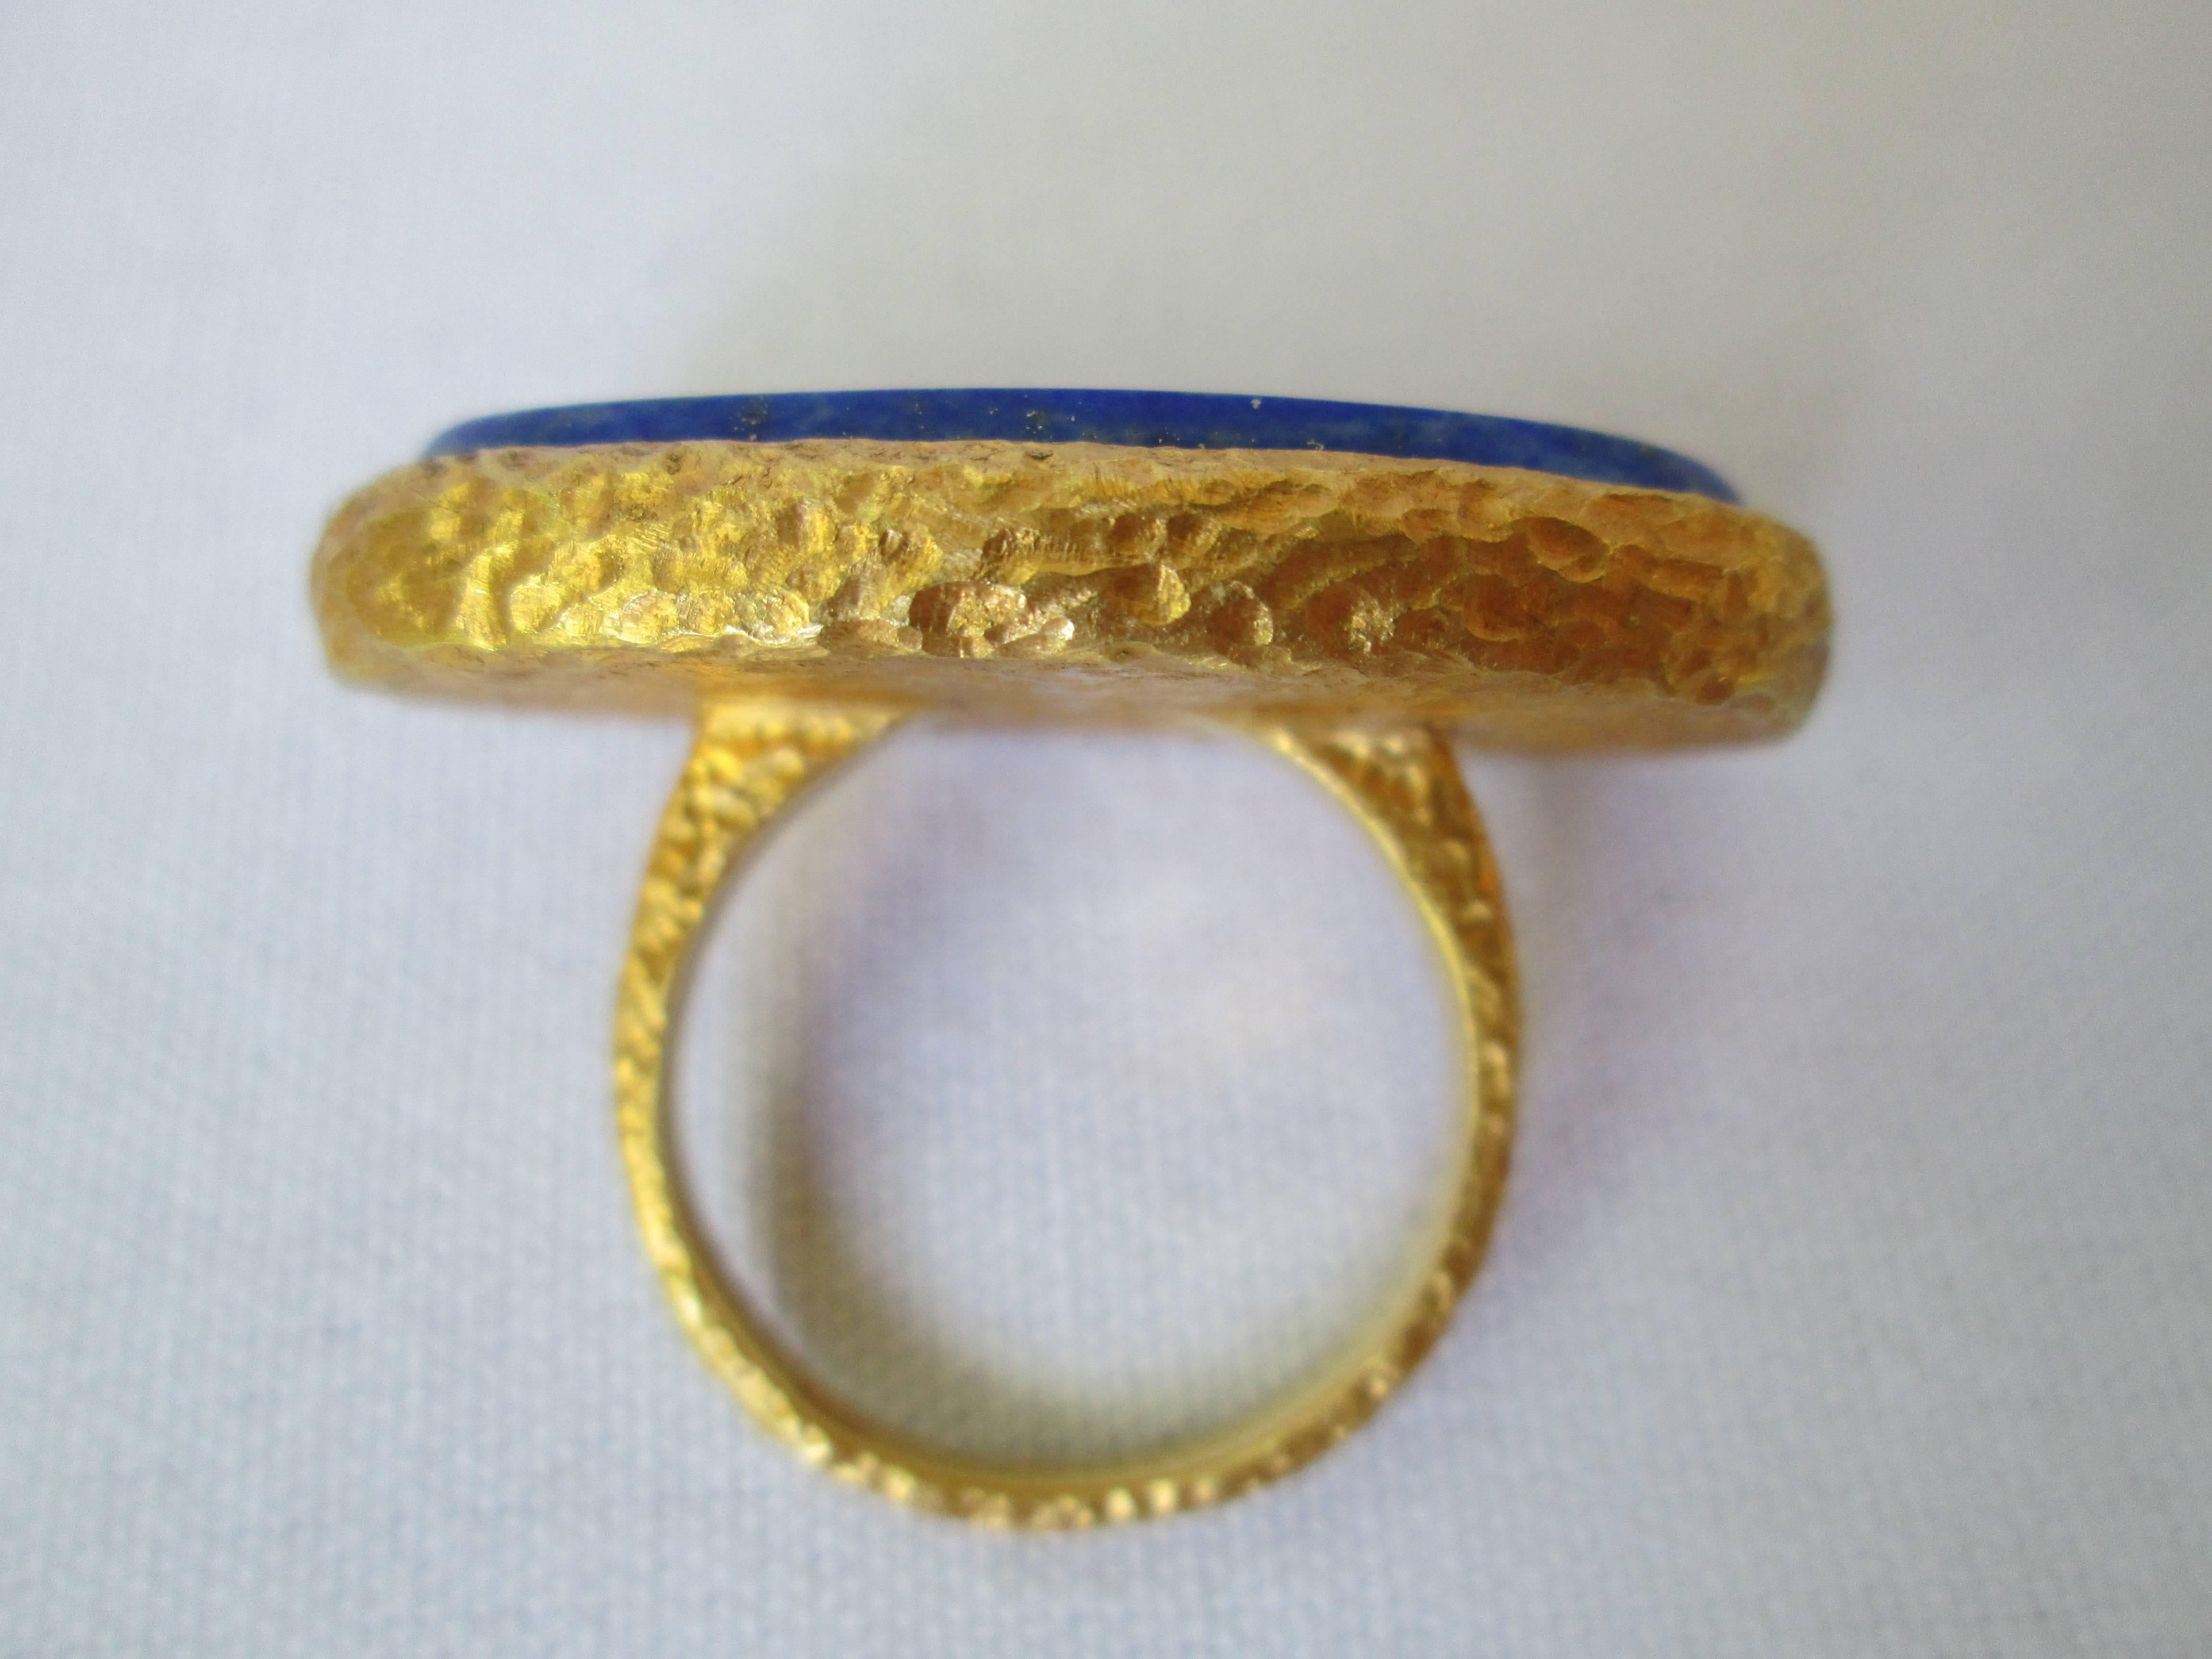 This original and stylish ring evokes the timelessness of antiquity. A large and smooth Lapis Lazuli oval stone is embedded in a hand hammered 18K Yellow Gold ring. The ring is sized 6.5. The Lapis Lazuli oval stone measures 30mm long and 16mm wide.